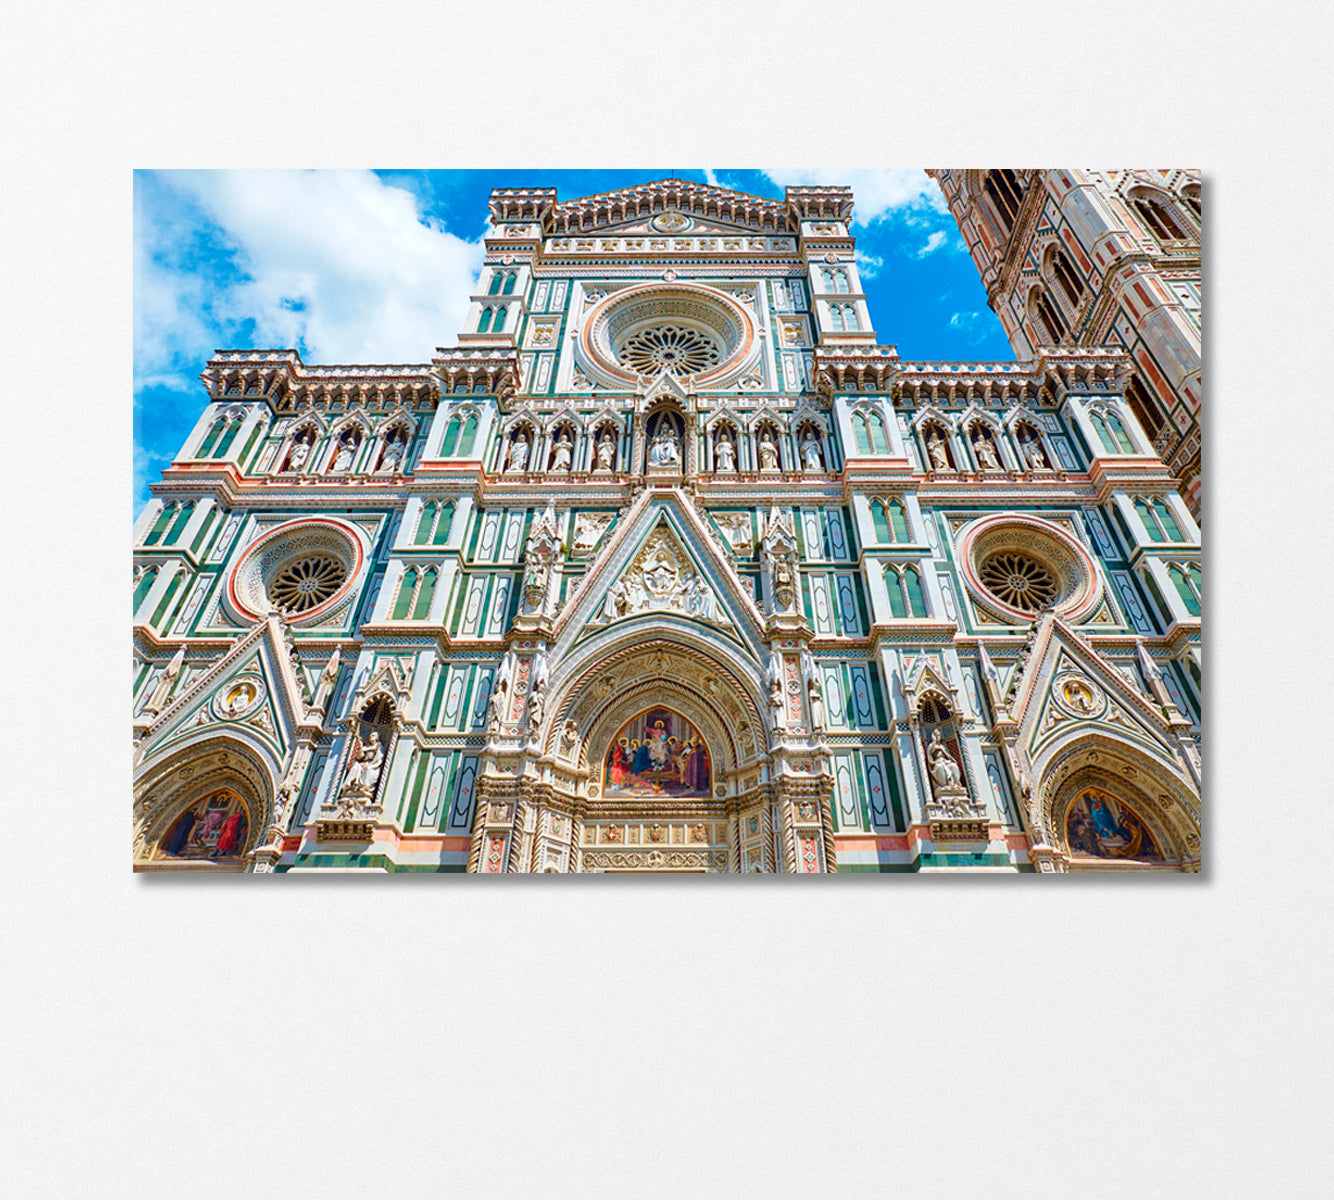 Cathedral in Florence Italy Canvas Print-CetArt-1 Panel-24x16 inches-CetArt